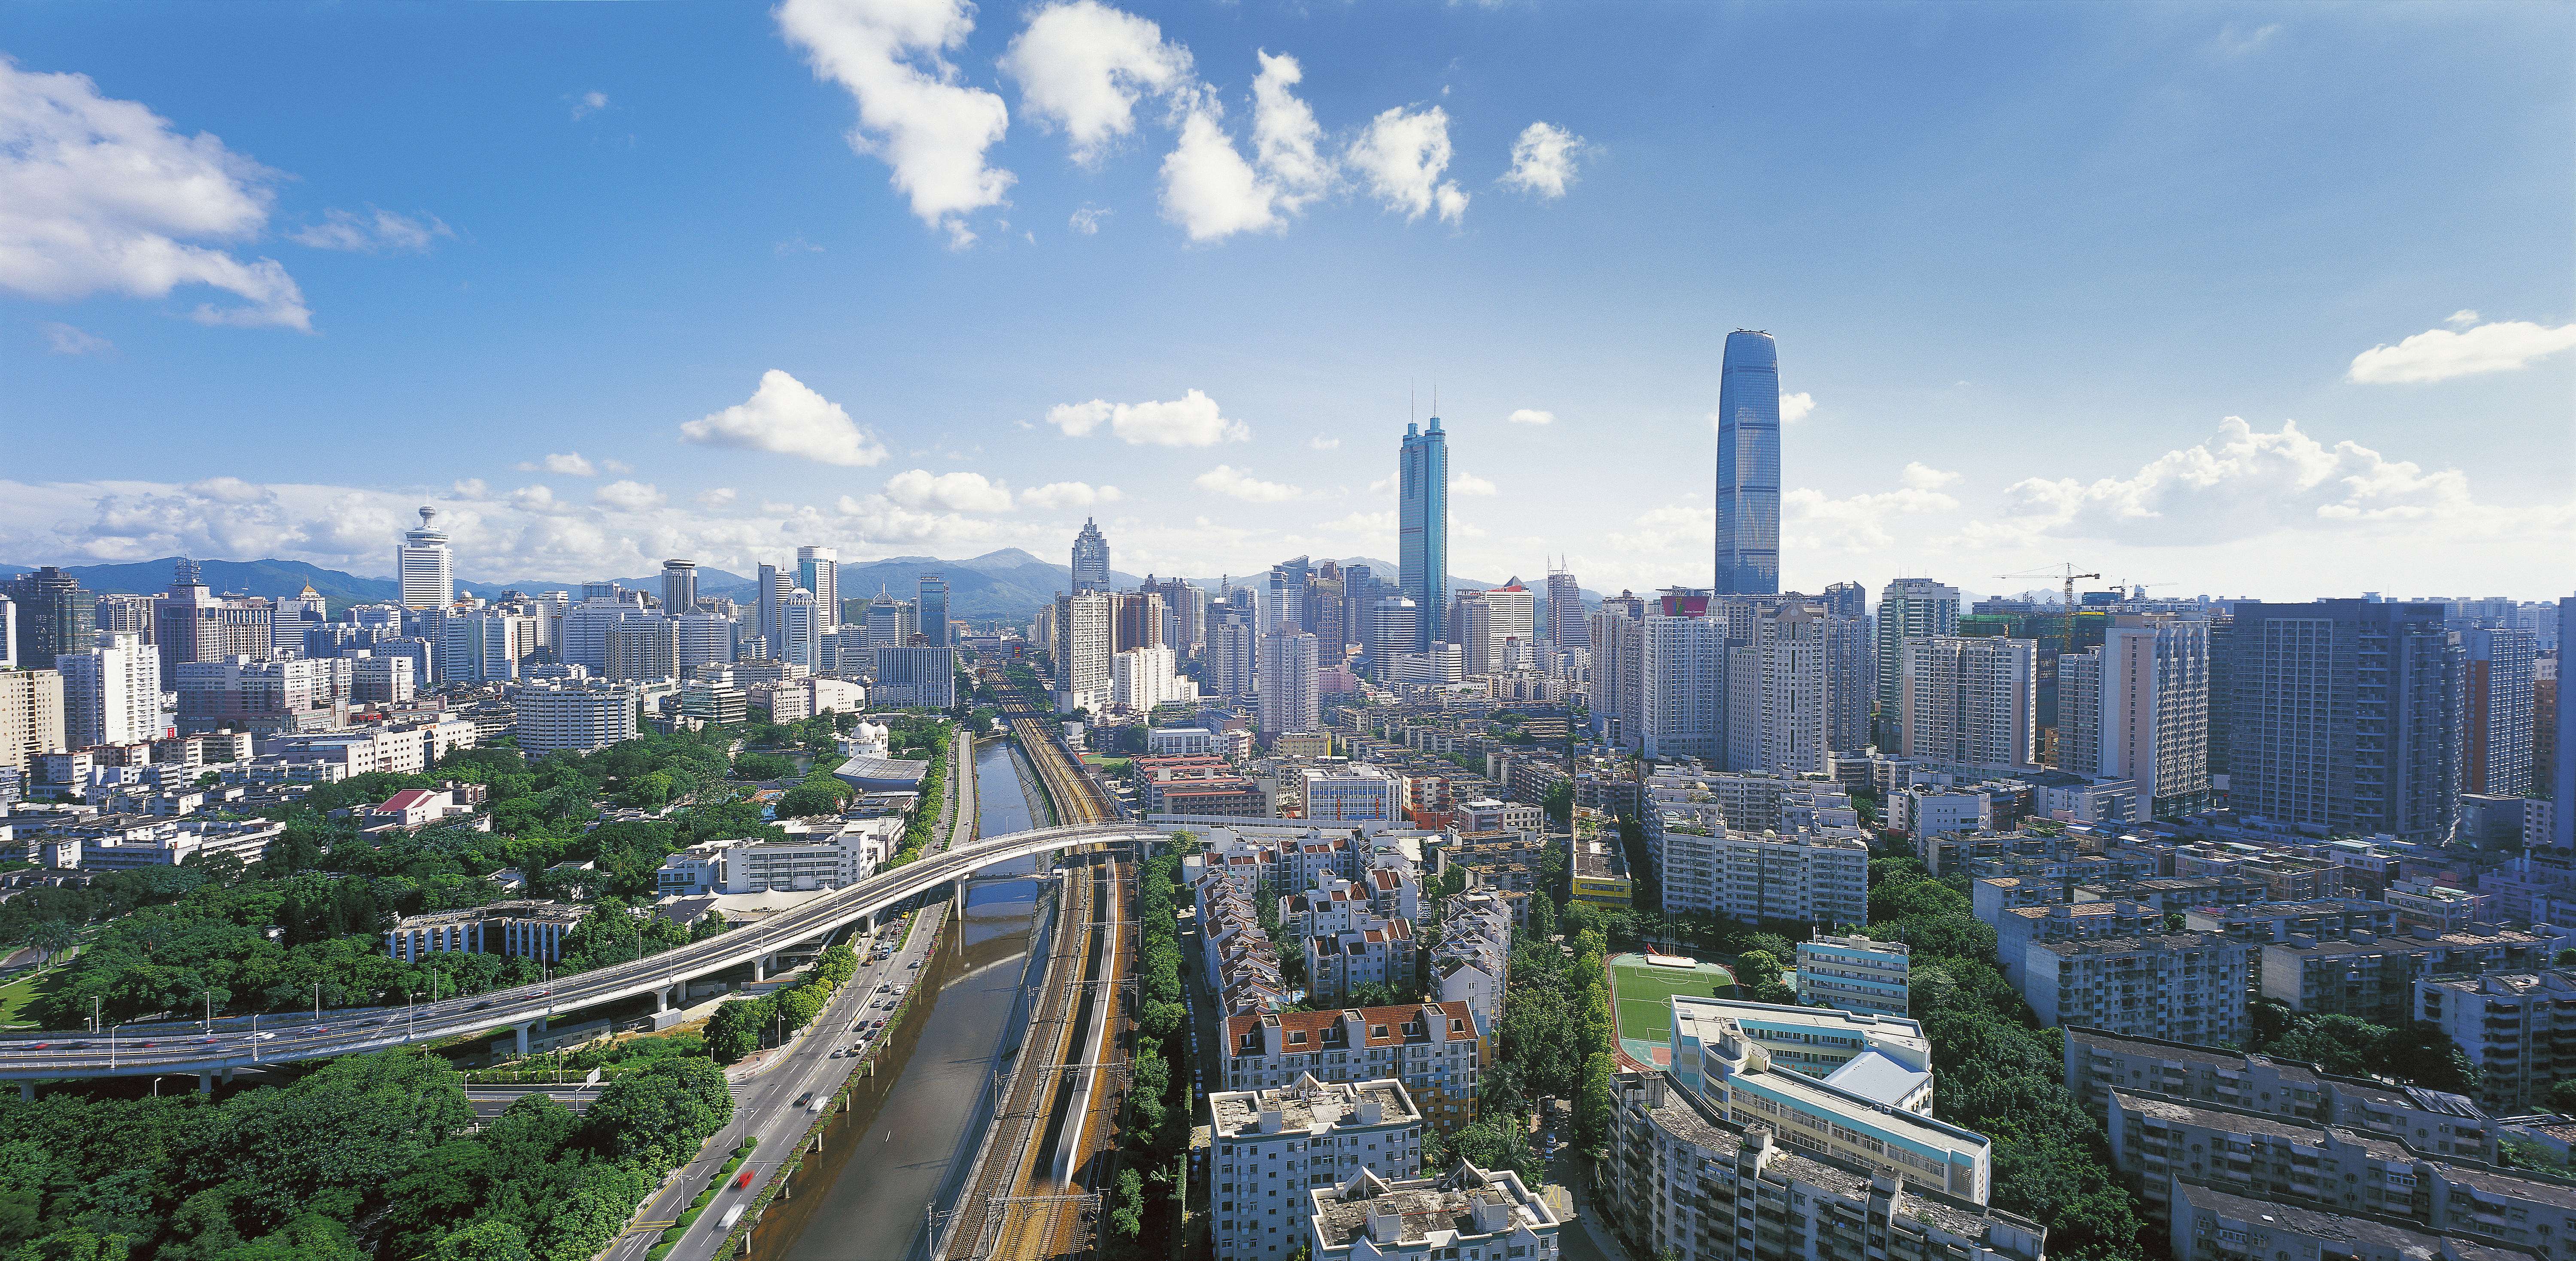 Shenzhen invested more than 80 billion yuan in research and development, accounting for about 4.1 per cent of local GDP. Photo: Alamy